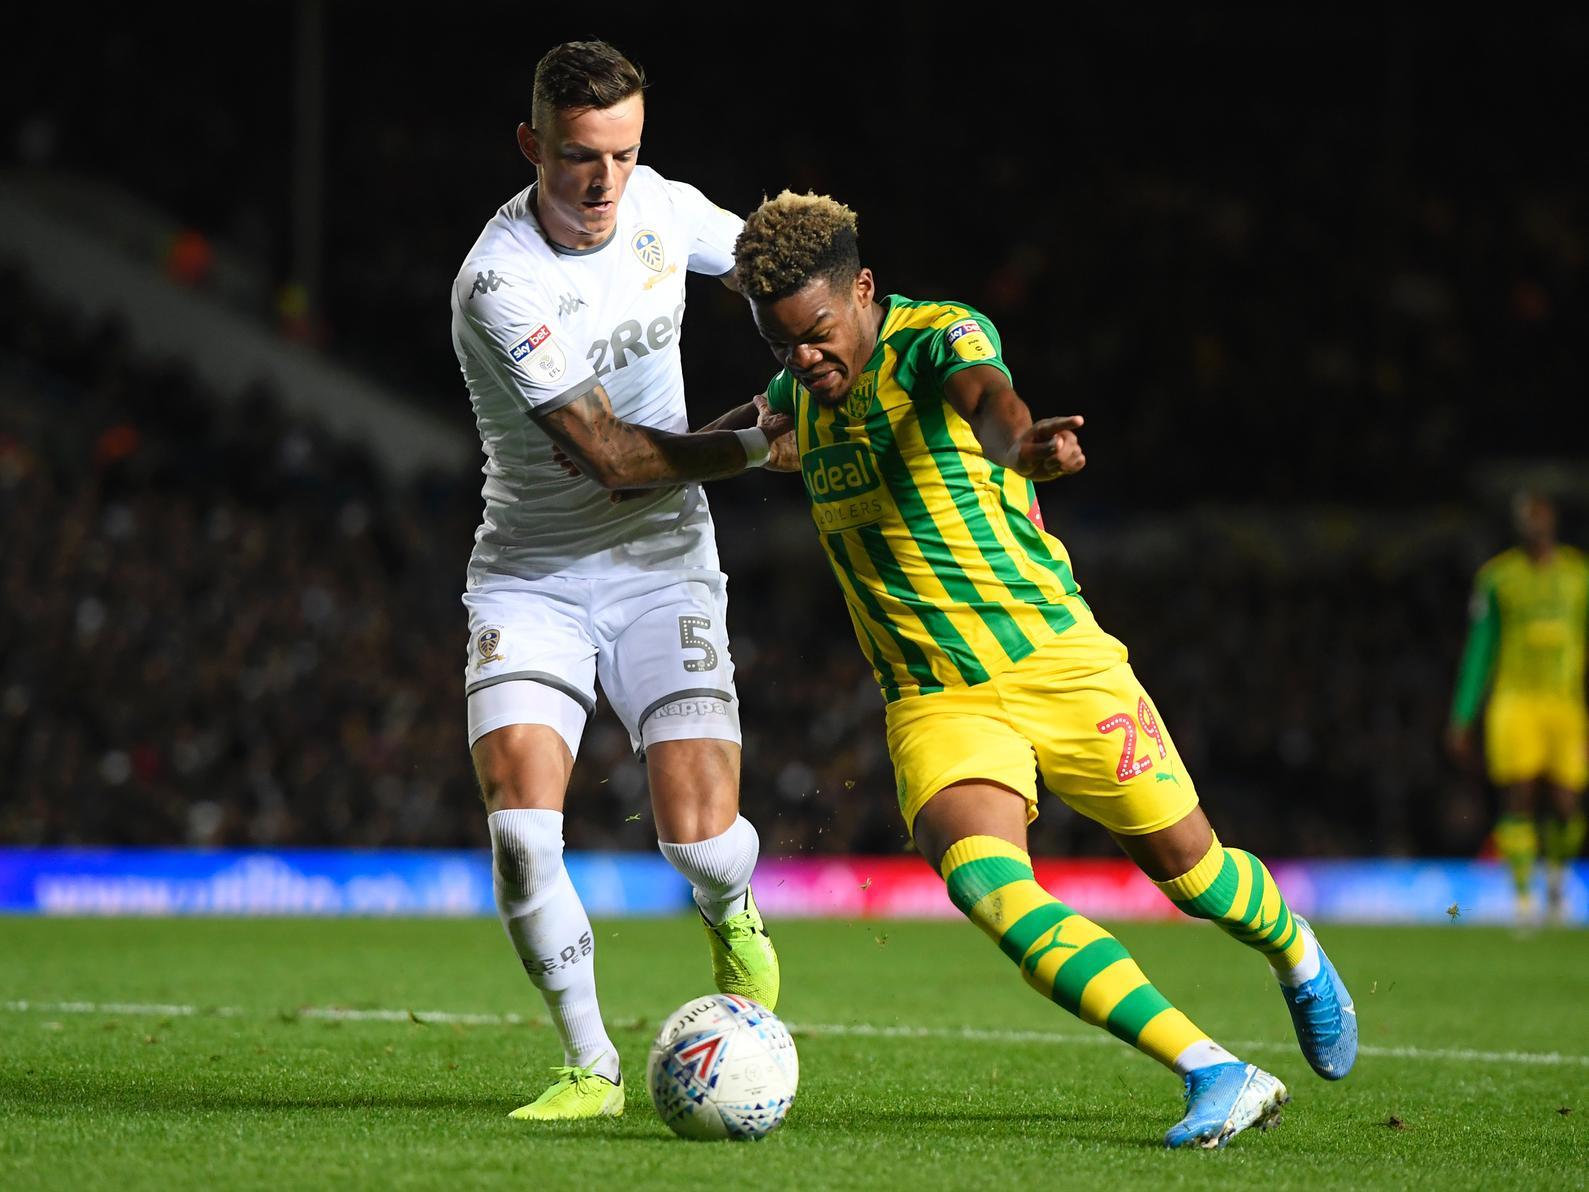 He's very, very popular at Elland Road, and Leeds fans will be desperate to sign him permanently if they get promoted. He's been one of the Championship's best players so far this season.